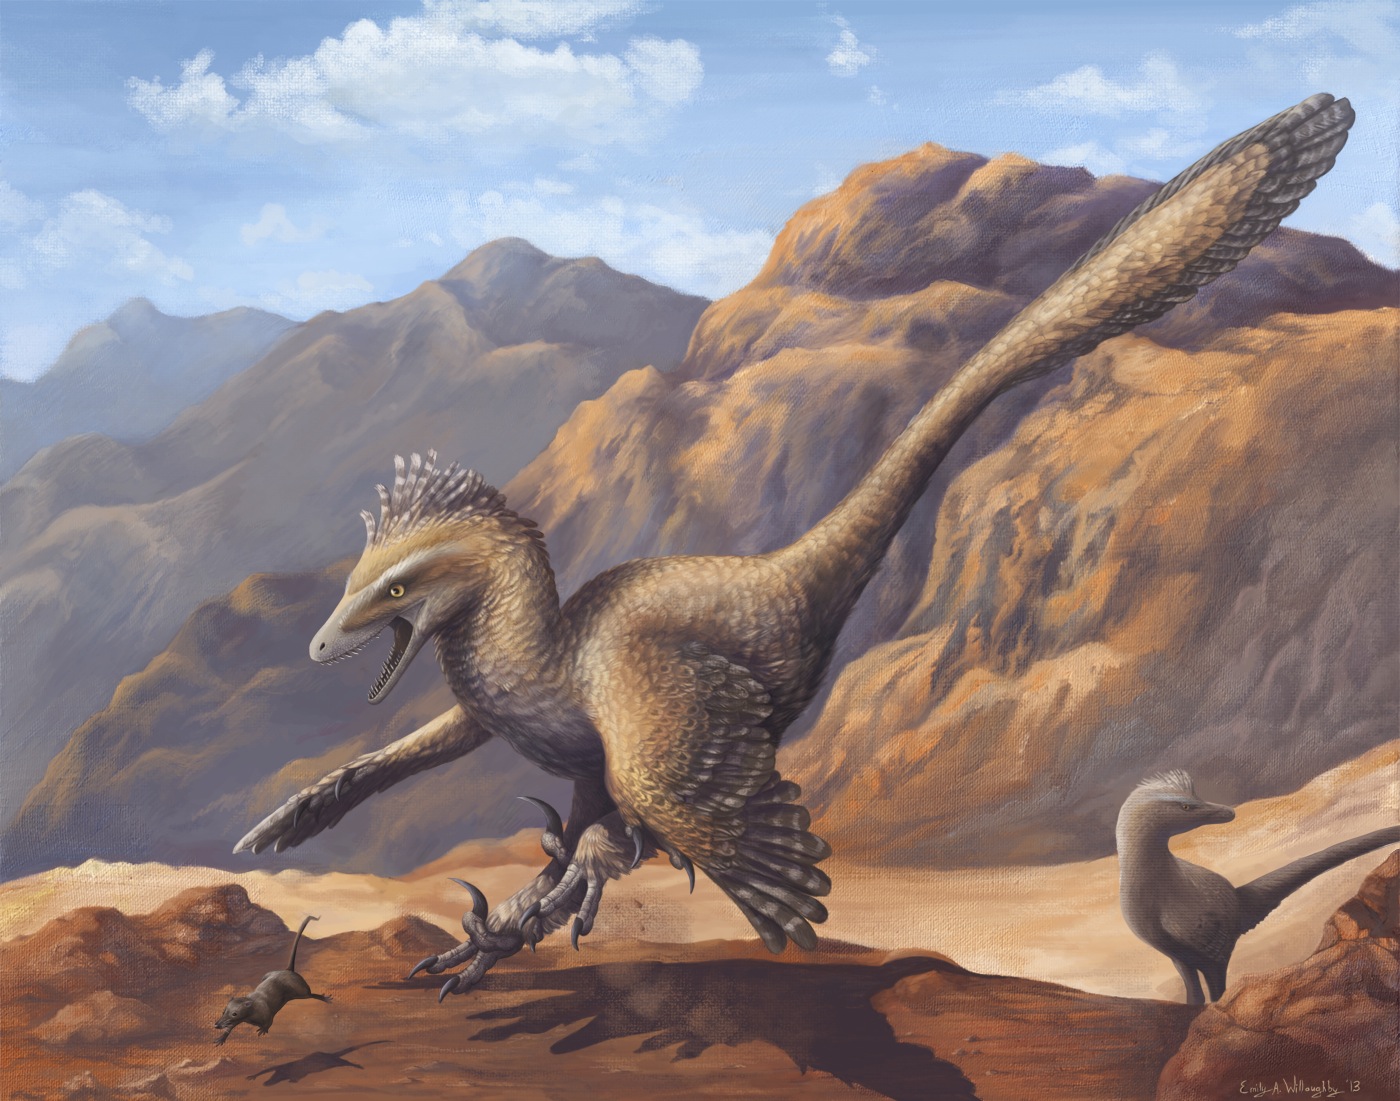 Your Favorite Artwork(s) of Your Favorite Fossil Species The_velociraptor_hunting_dance_by_ewilloughby-d68f94a